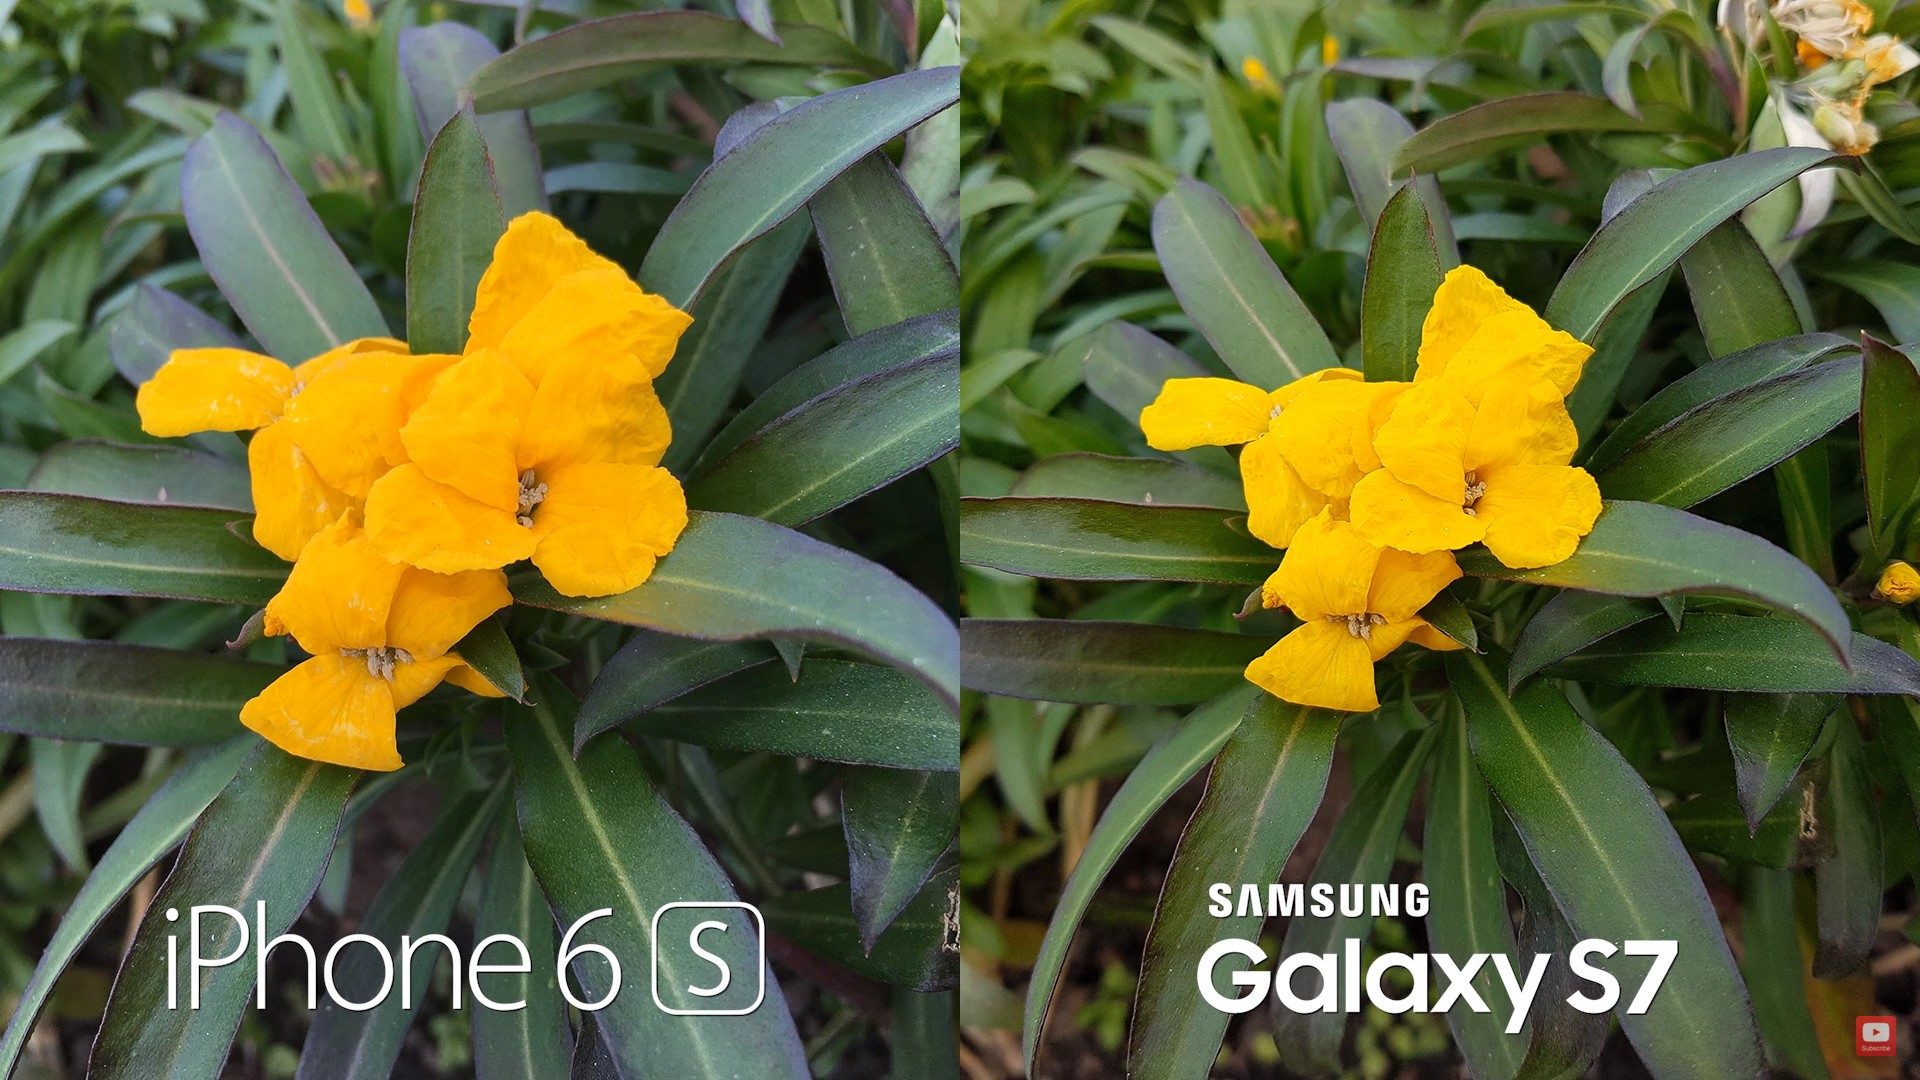 Samsung Galaxy S7 Mops the Floor Up with iPhone 6S in Camera Test